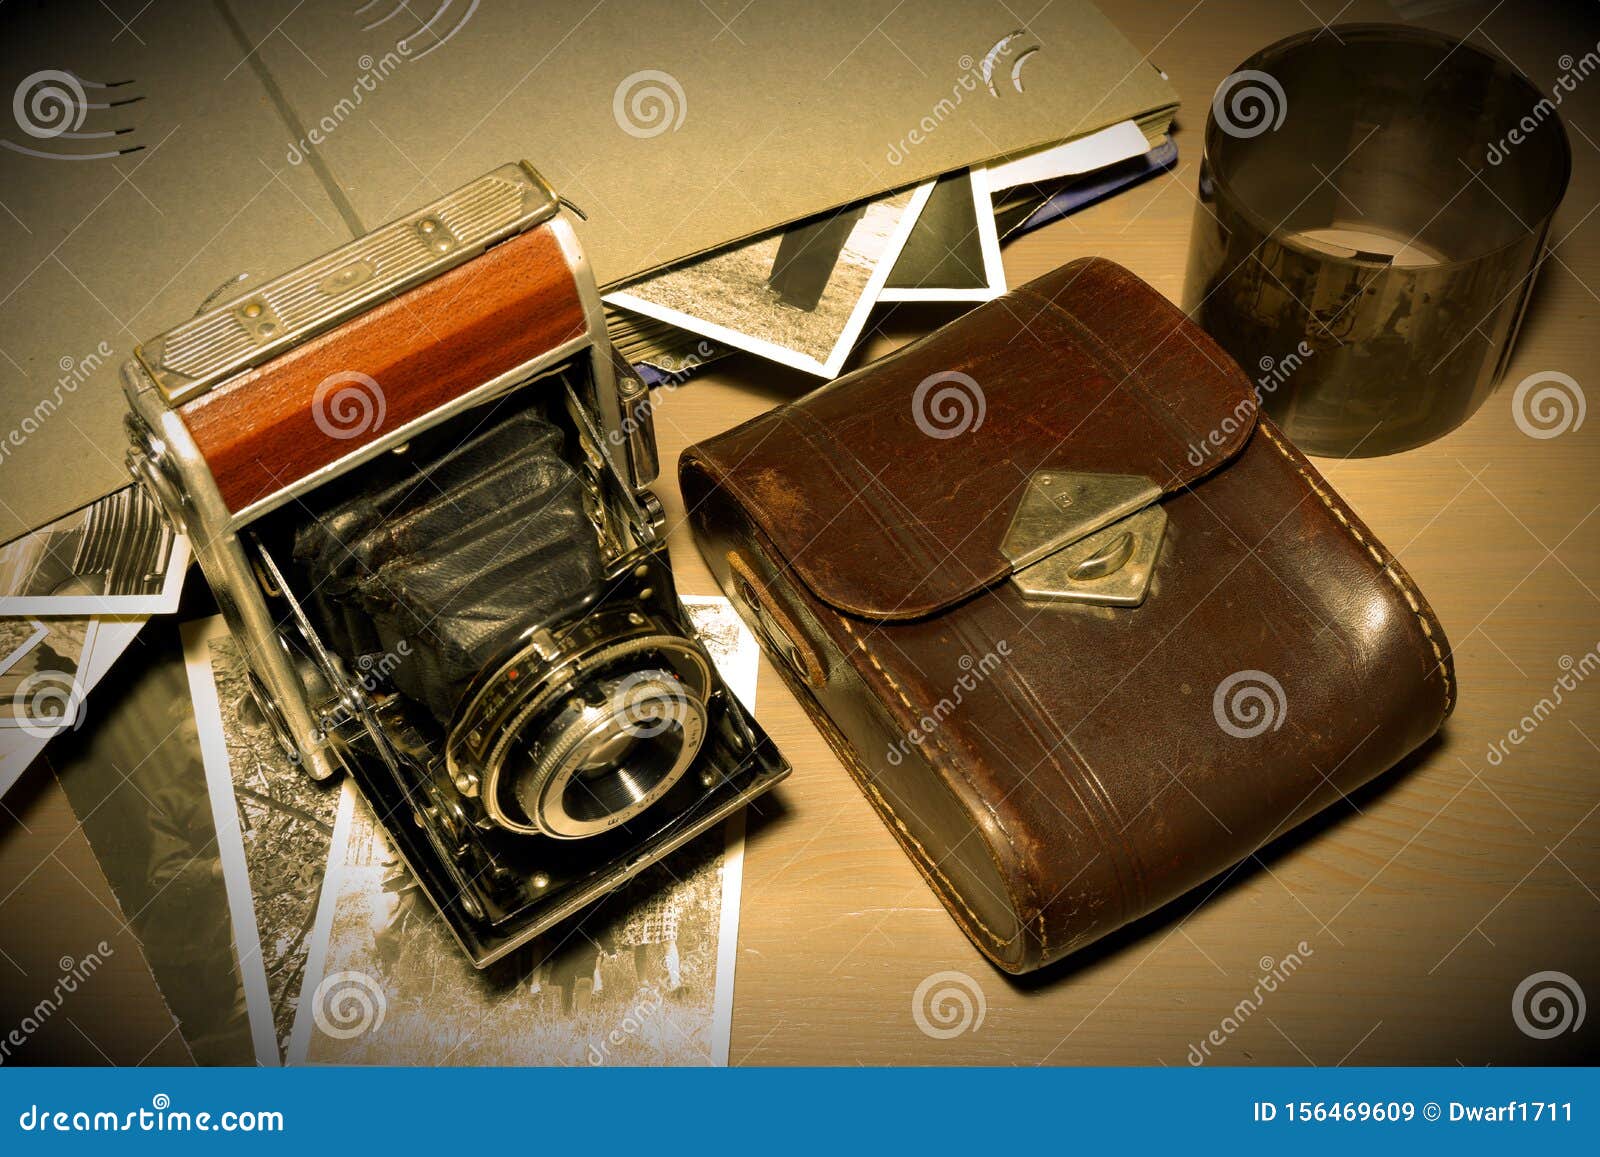 Retro old vintage outdated manual film camera circa 1940s, developed negative films, vintage photo album and leather camera case on wooden table. Vintage style sepia vignette photo.